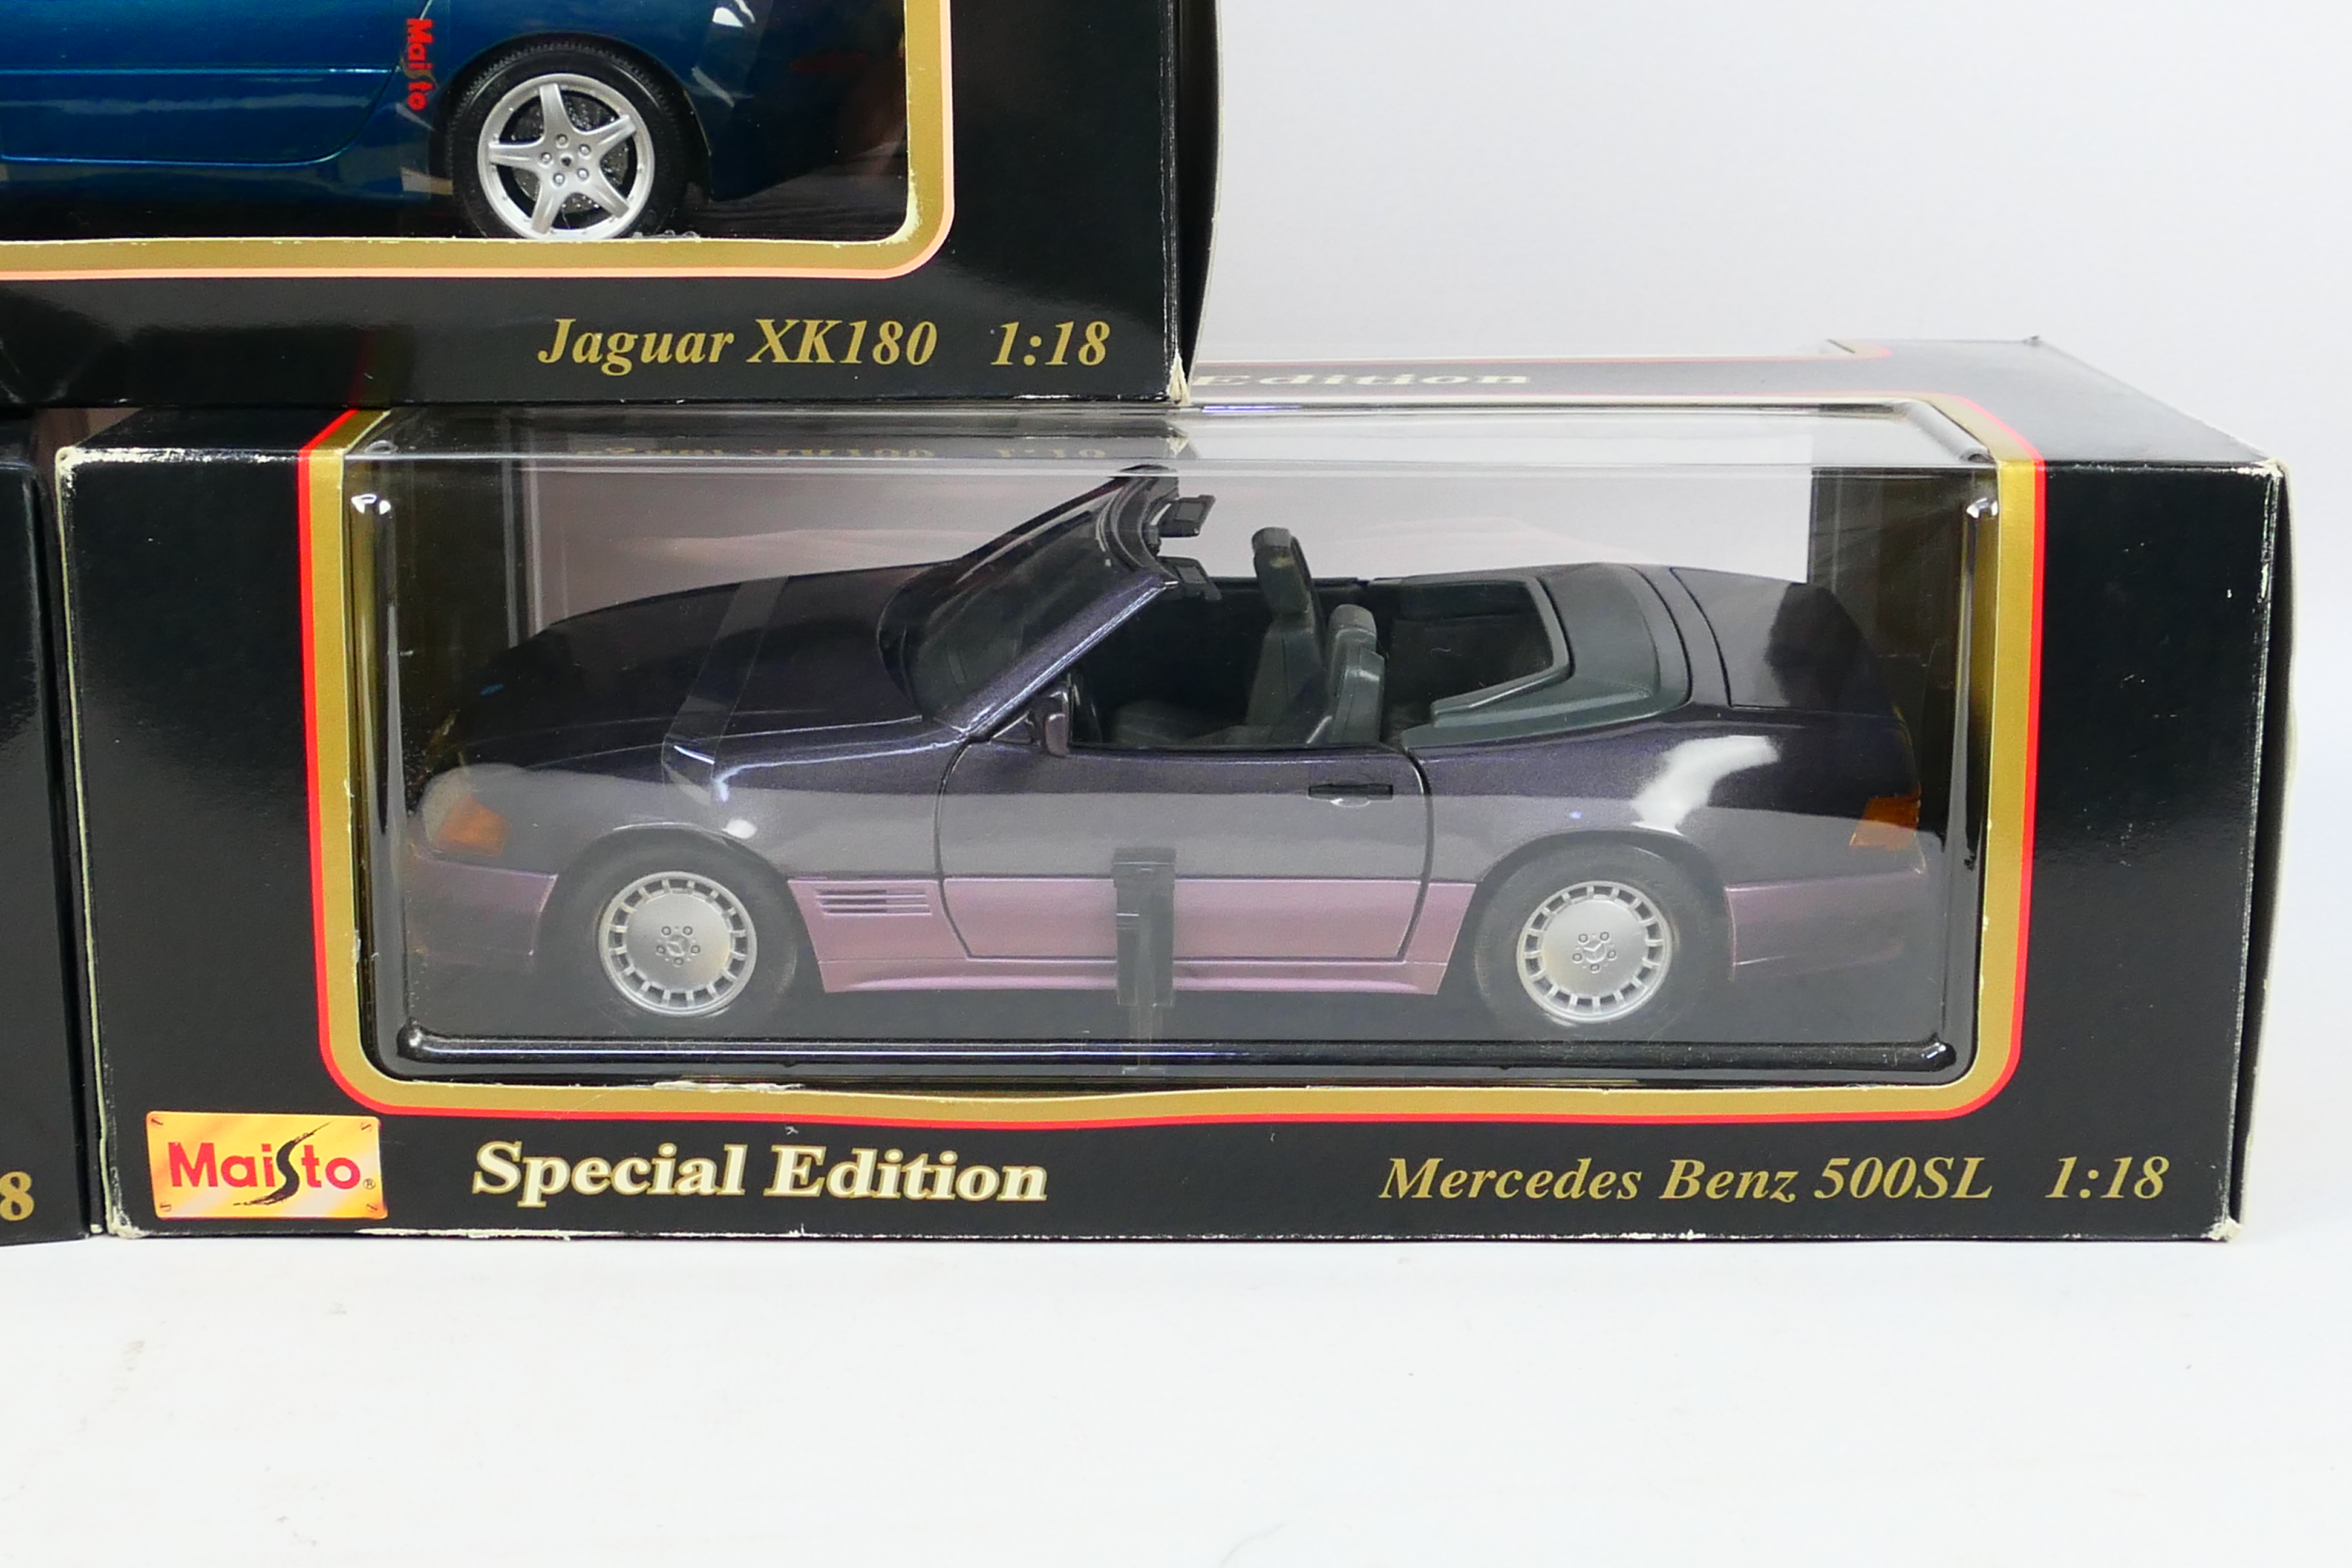 Maisto - Three boxed 1:18 scale Maisto 'Special Edition' diecast model cars. - Image 3 of 4